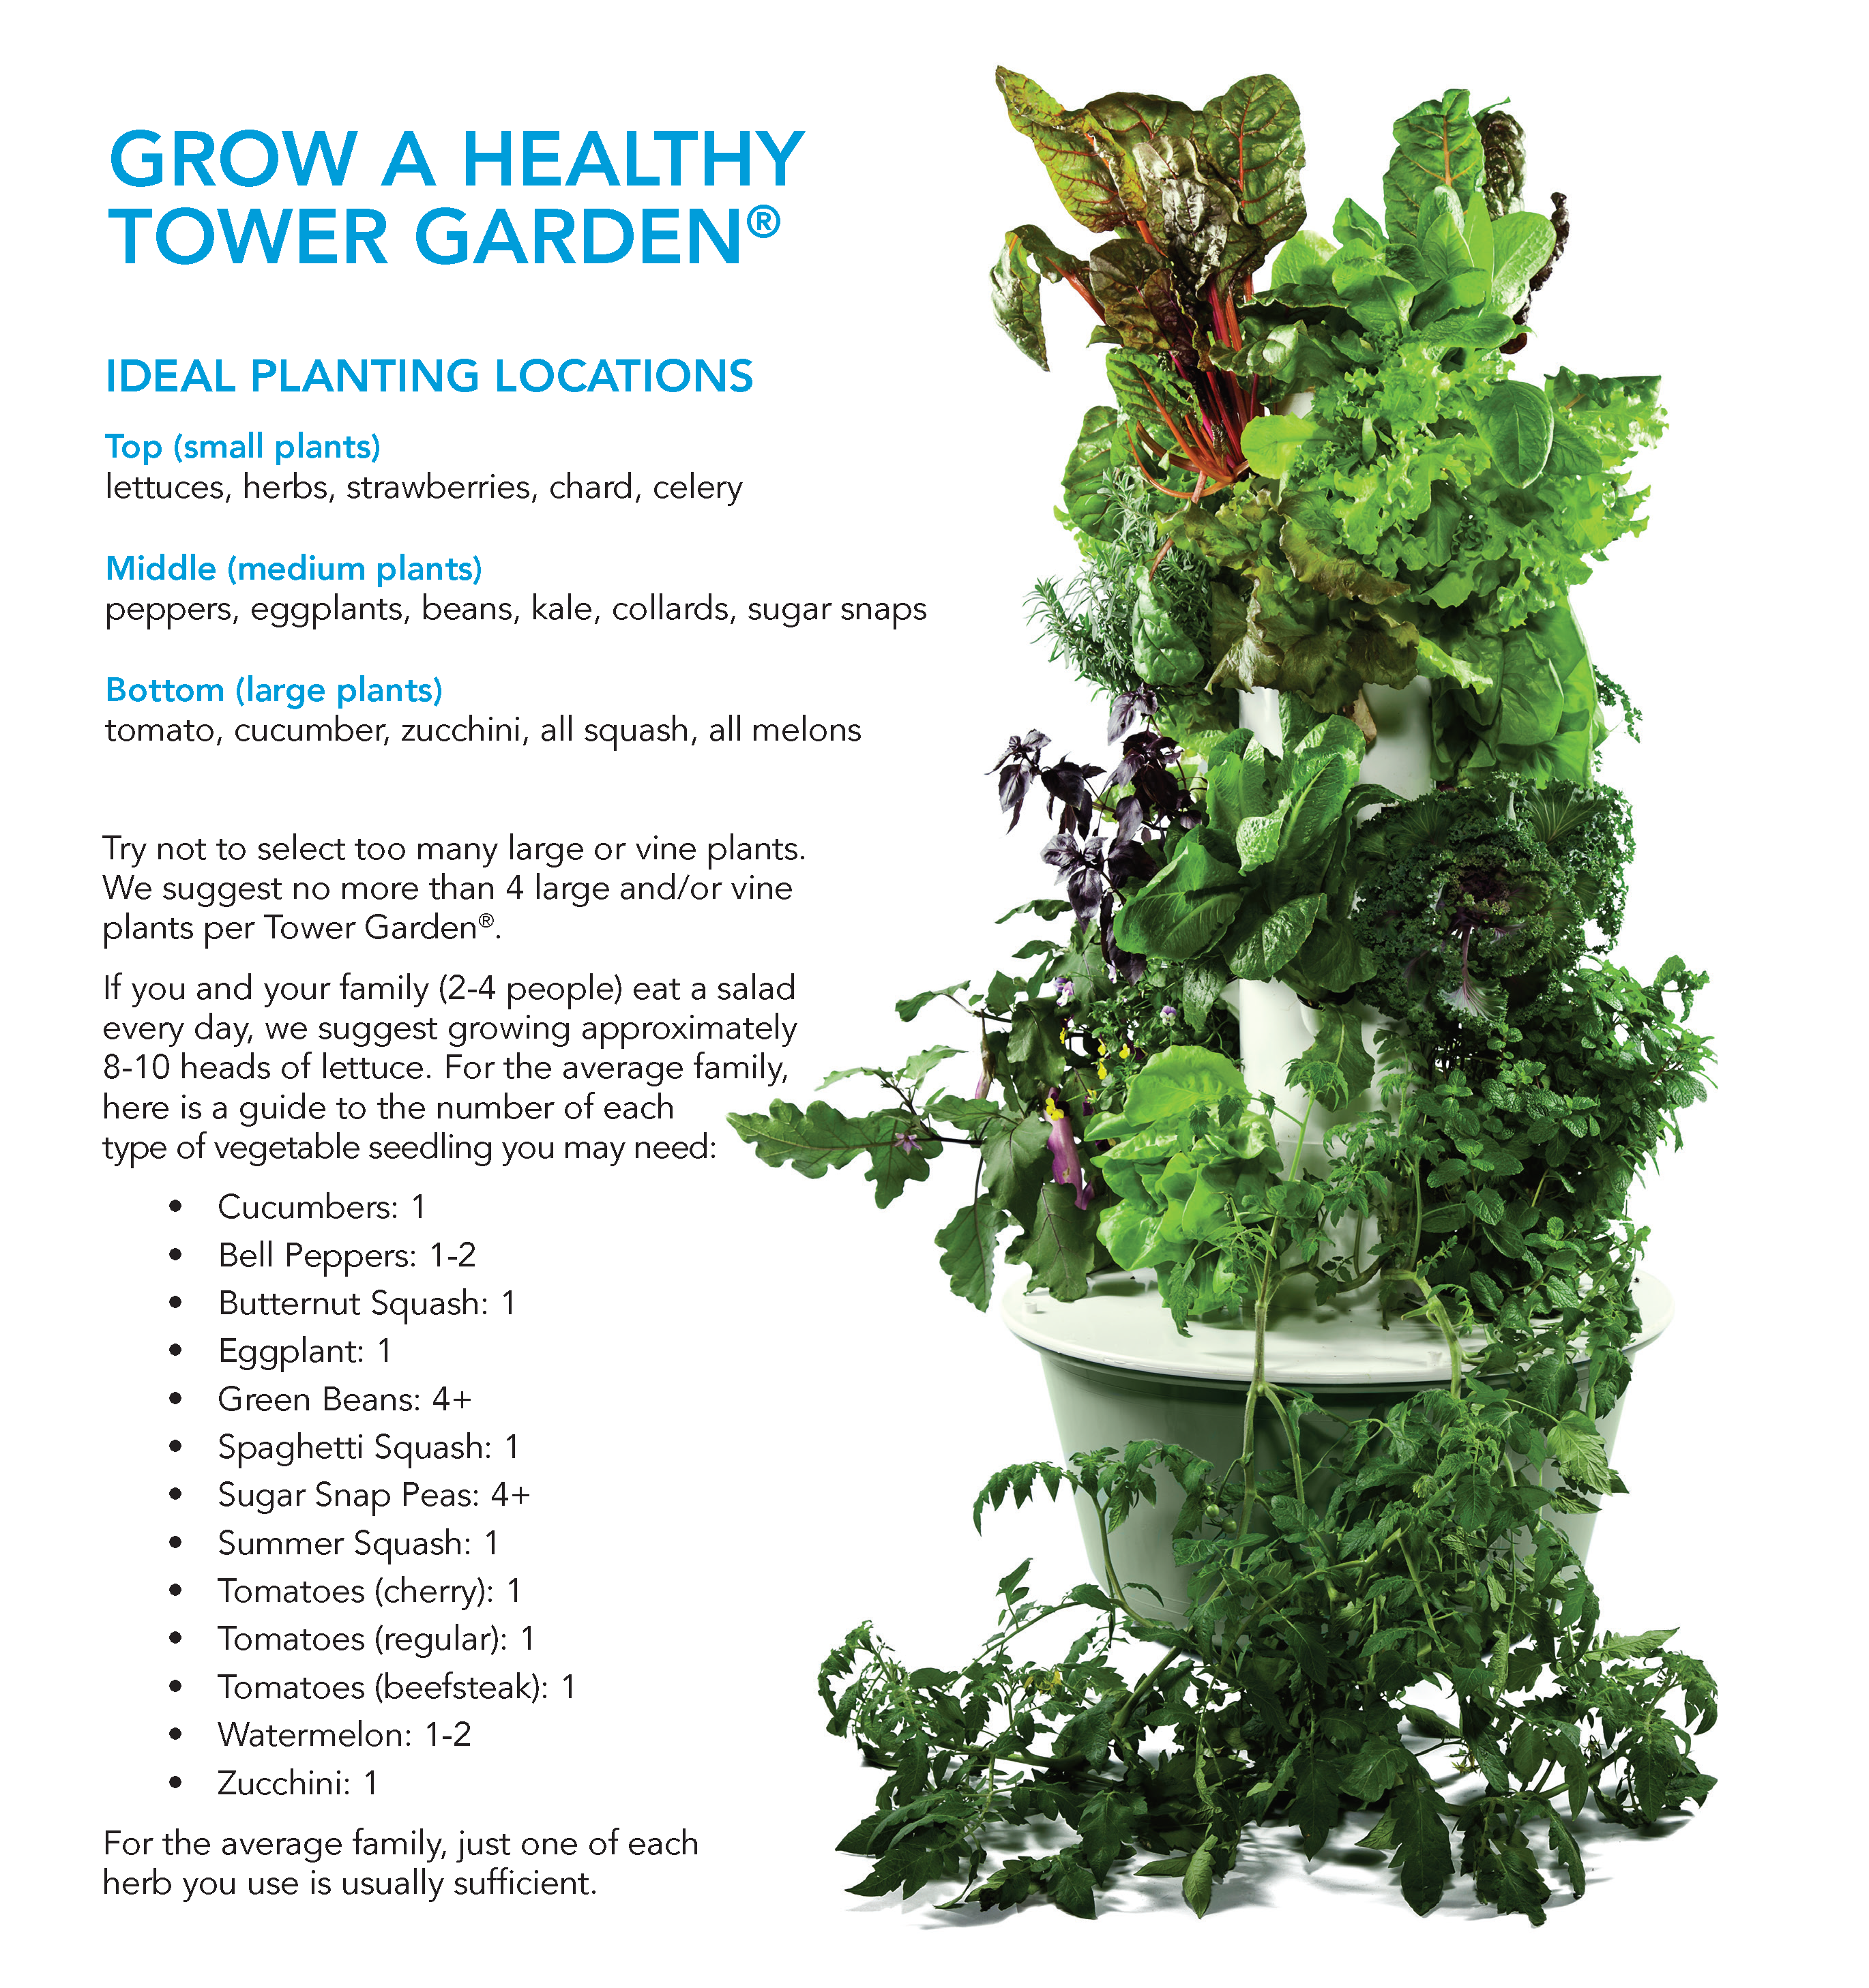 How to grow a healthy Tower Garden graphic.